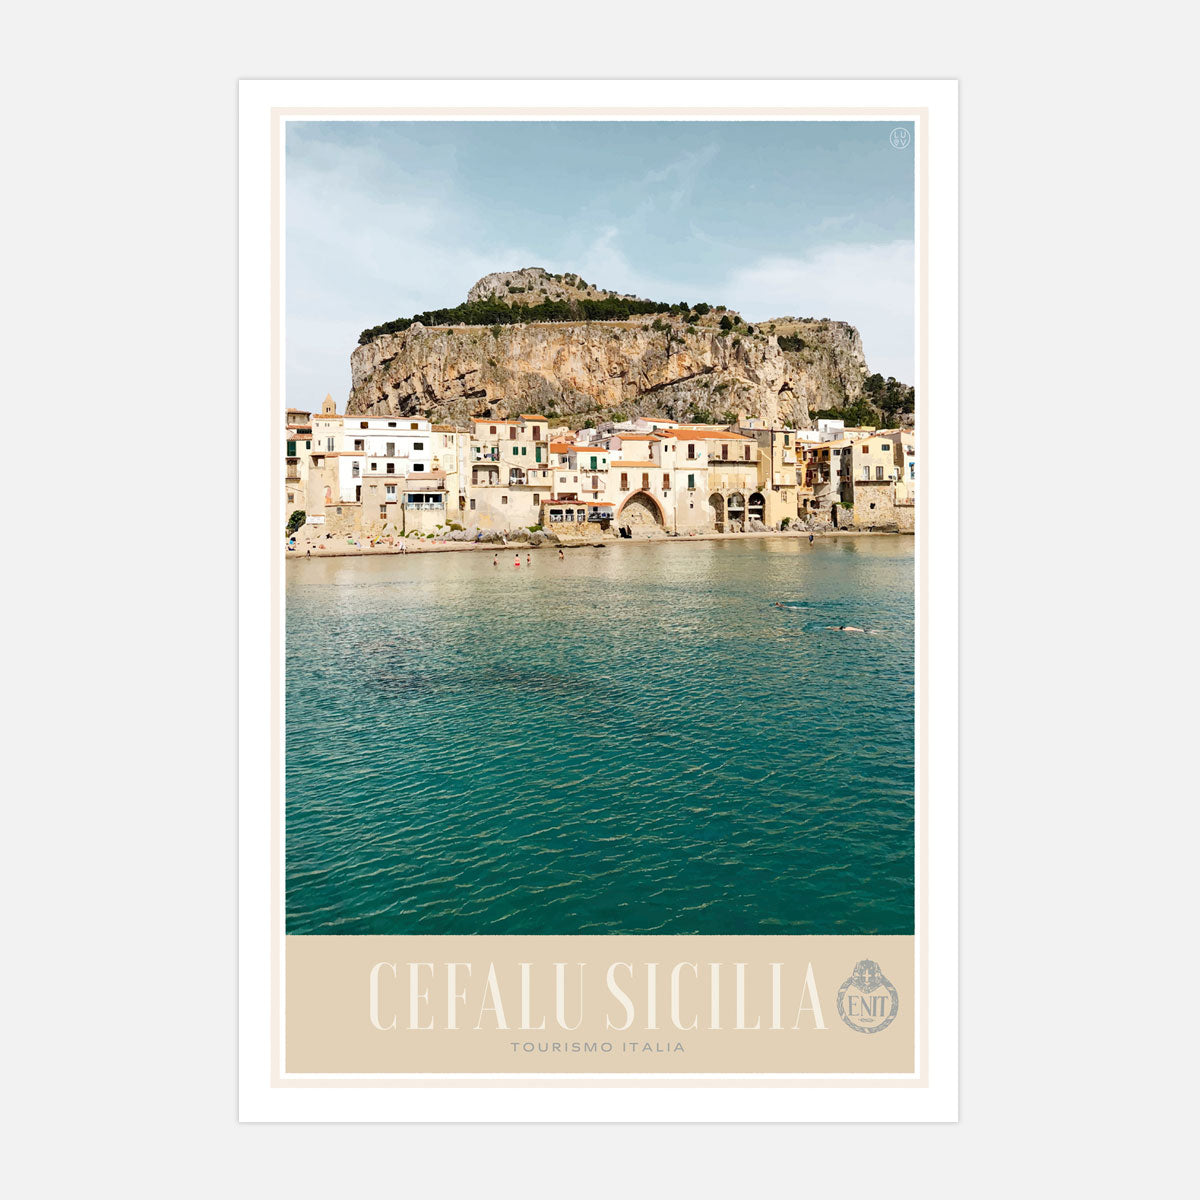 Cefalu Sicily retro vintage print from Places We Luv